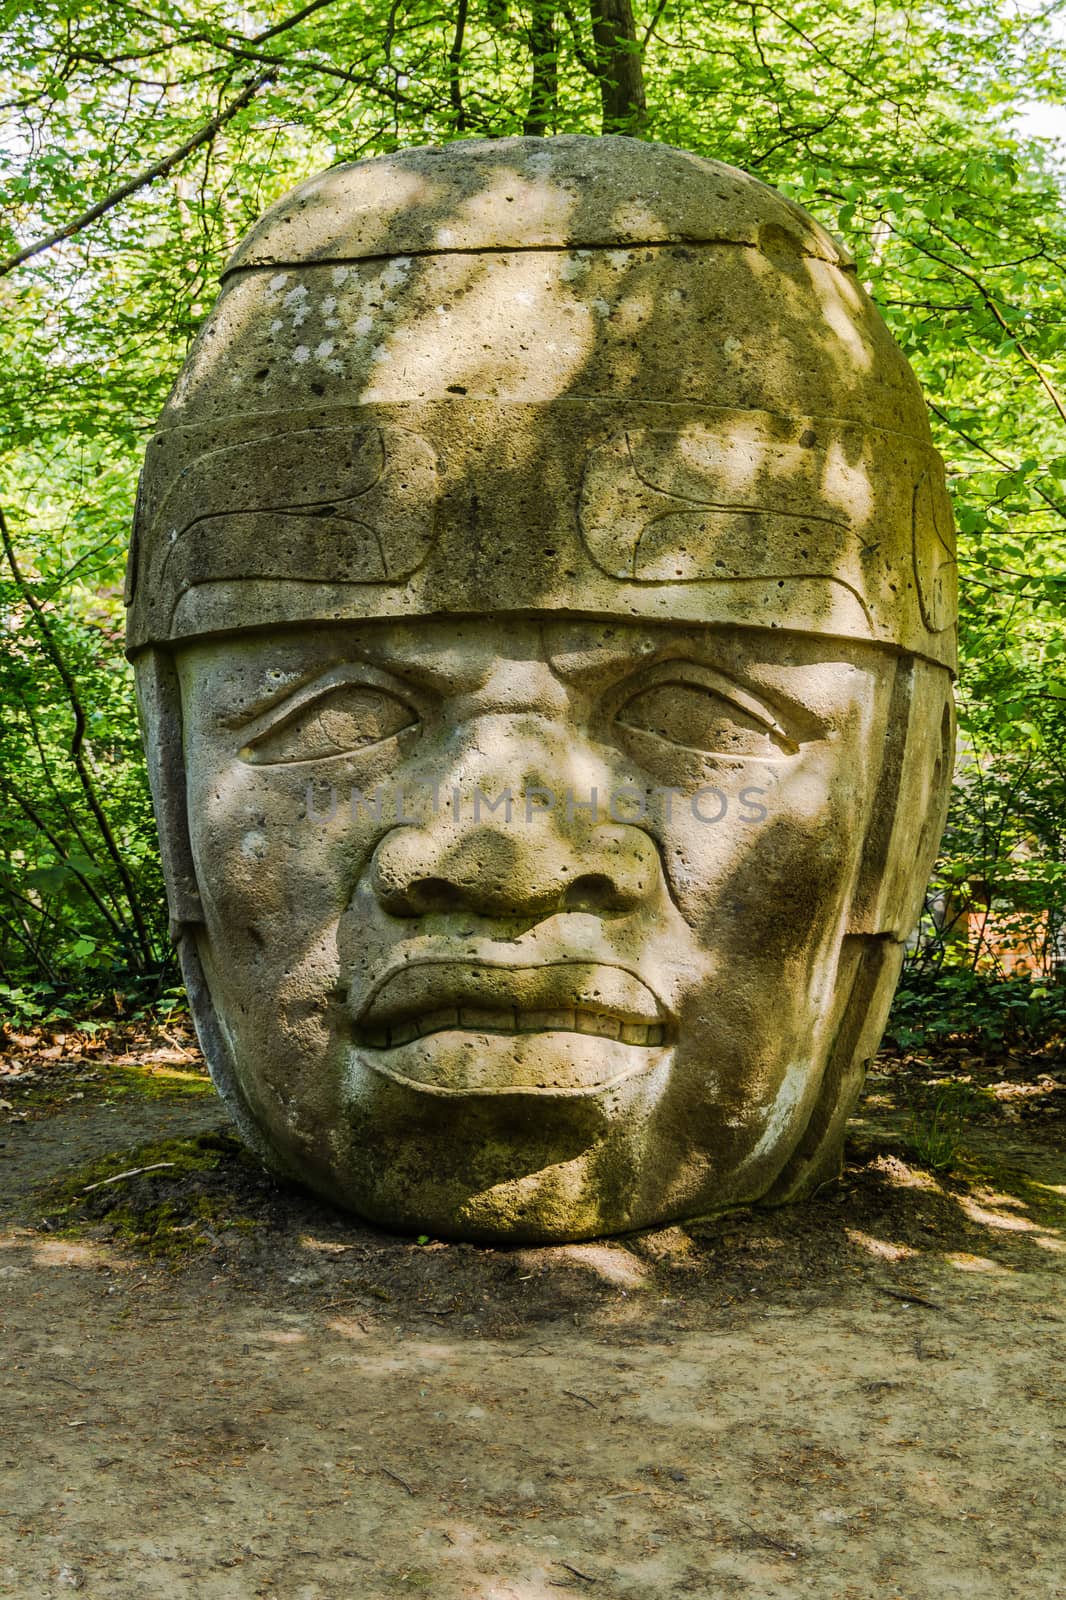 Replica of Olmec Head No 8 in Tournay-Solvay Park in Brussels. The original stands in the entrance of the University of Xalapa Museum of Anthropology in Veracruz, Mexico.